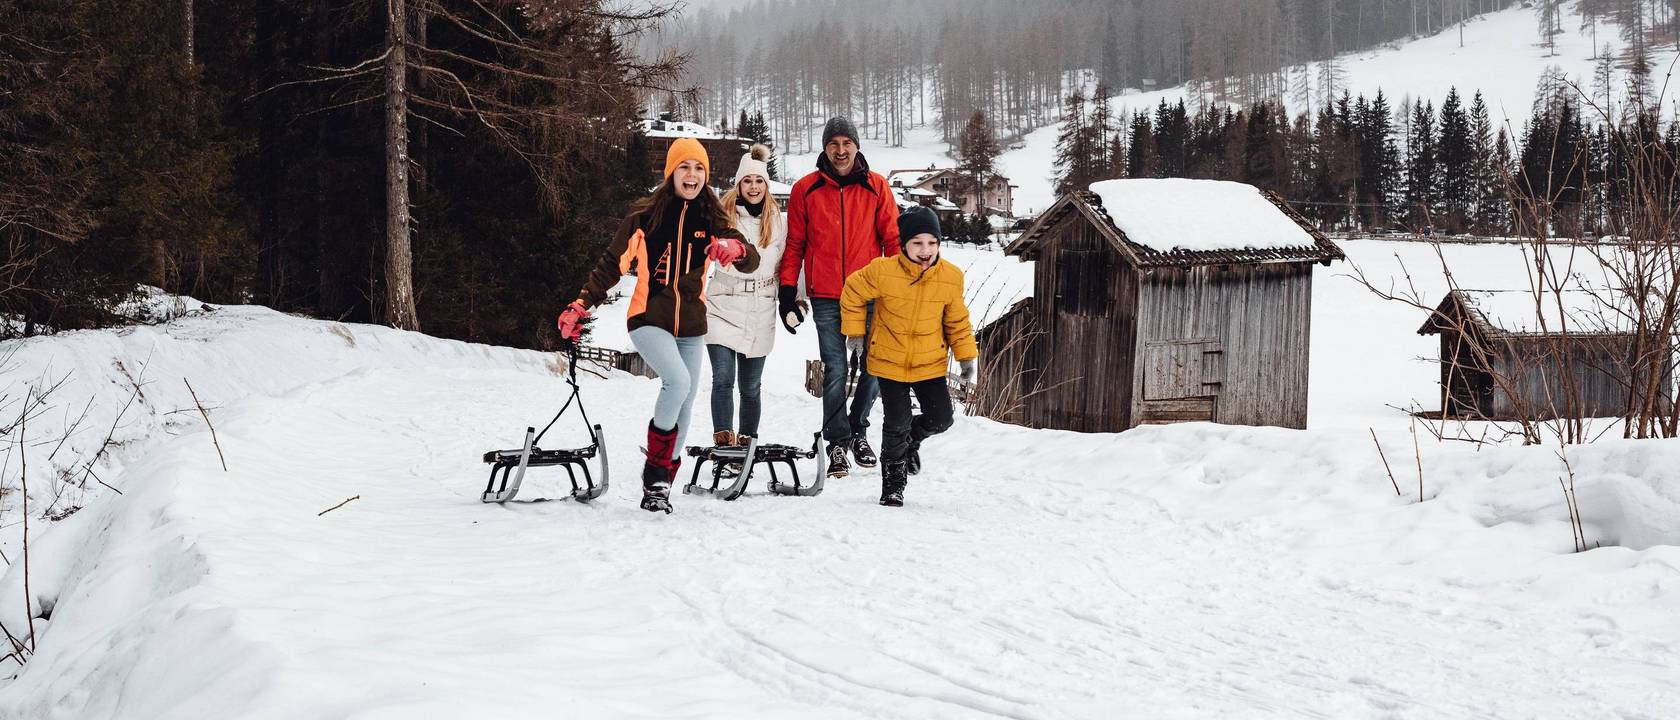 Winter holiday with children? Only in South Tyrol!